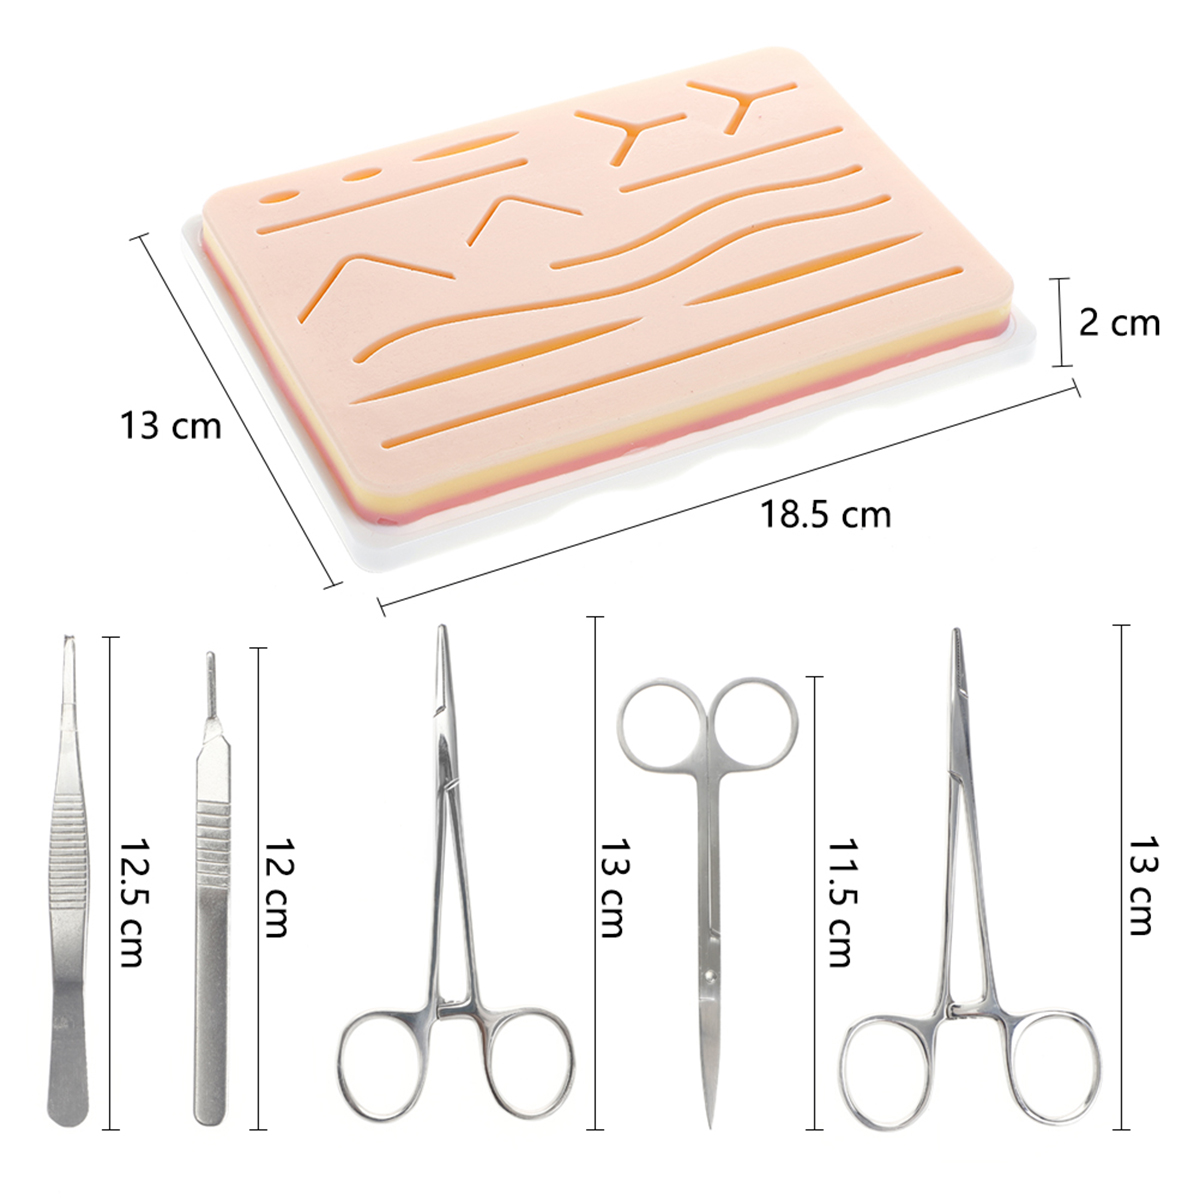 25 In 1 Medical Skin Suture Surgical Training Kit Silicone Pad Needle Scissors 15